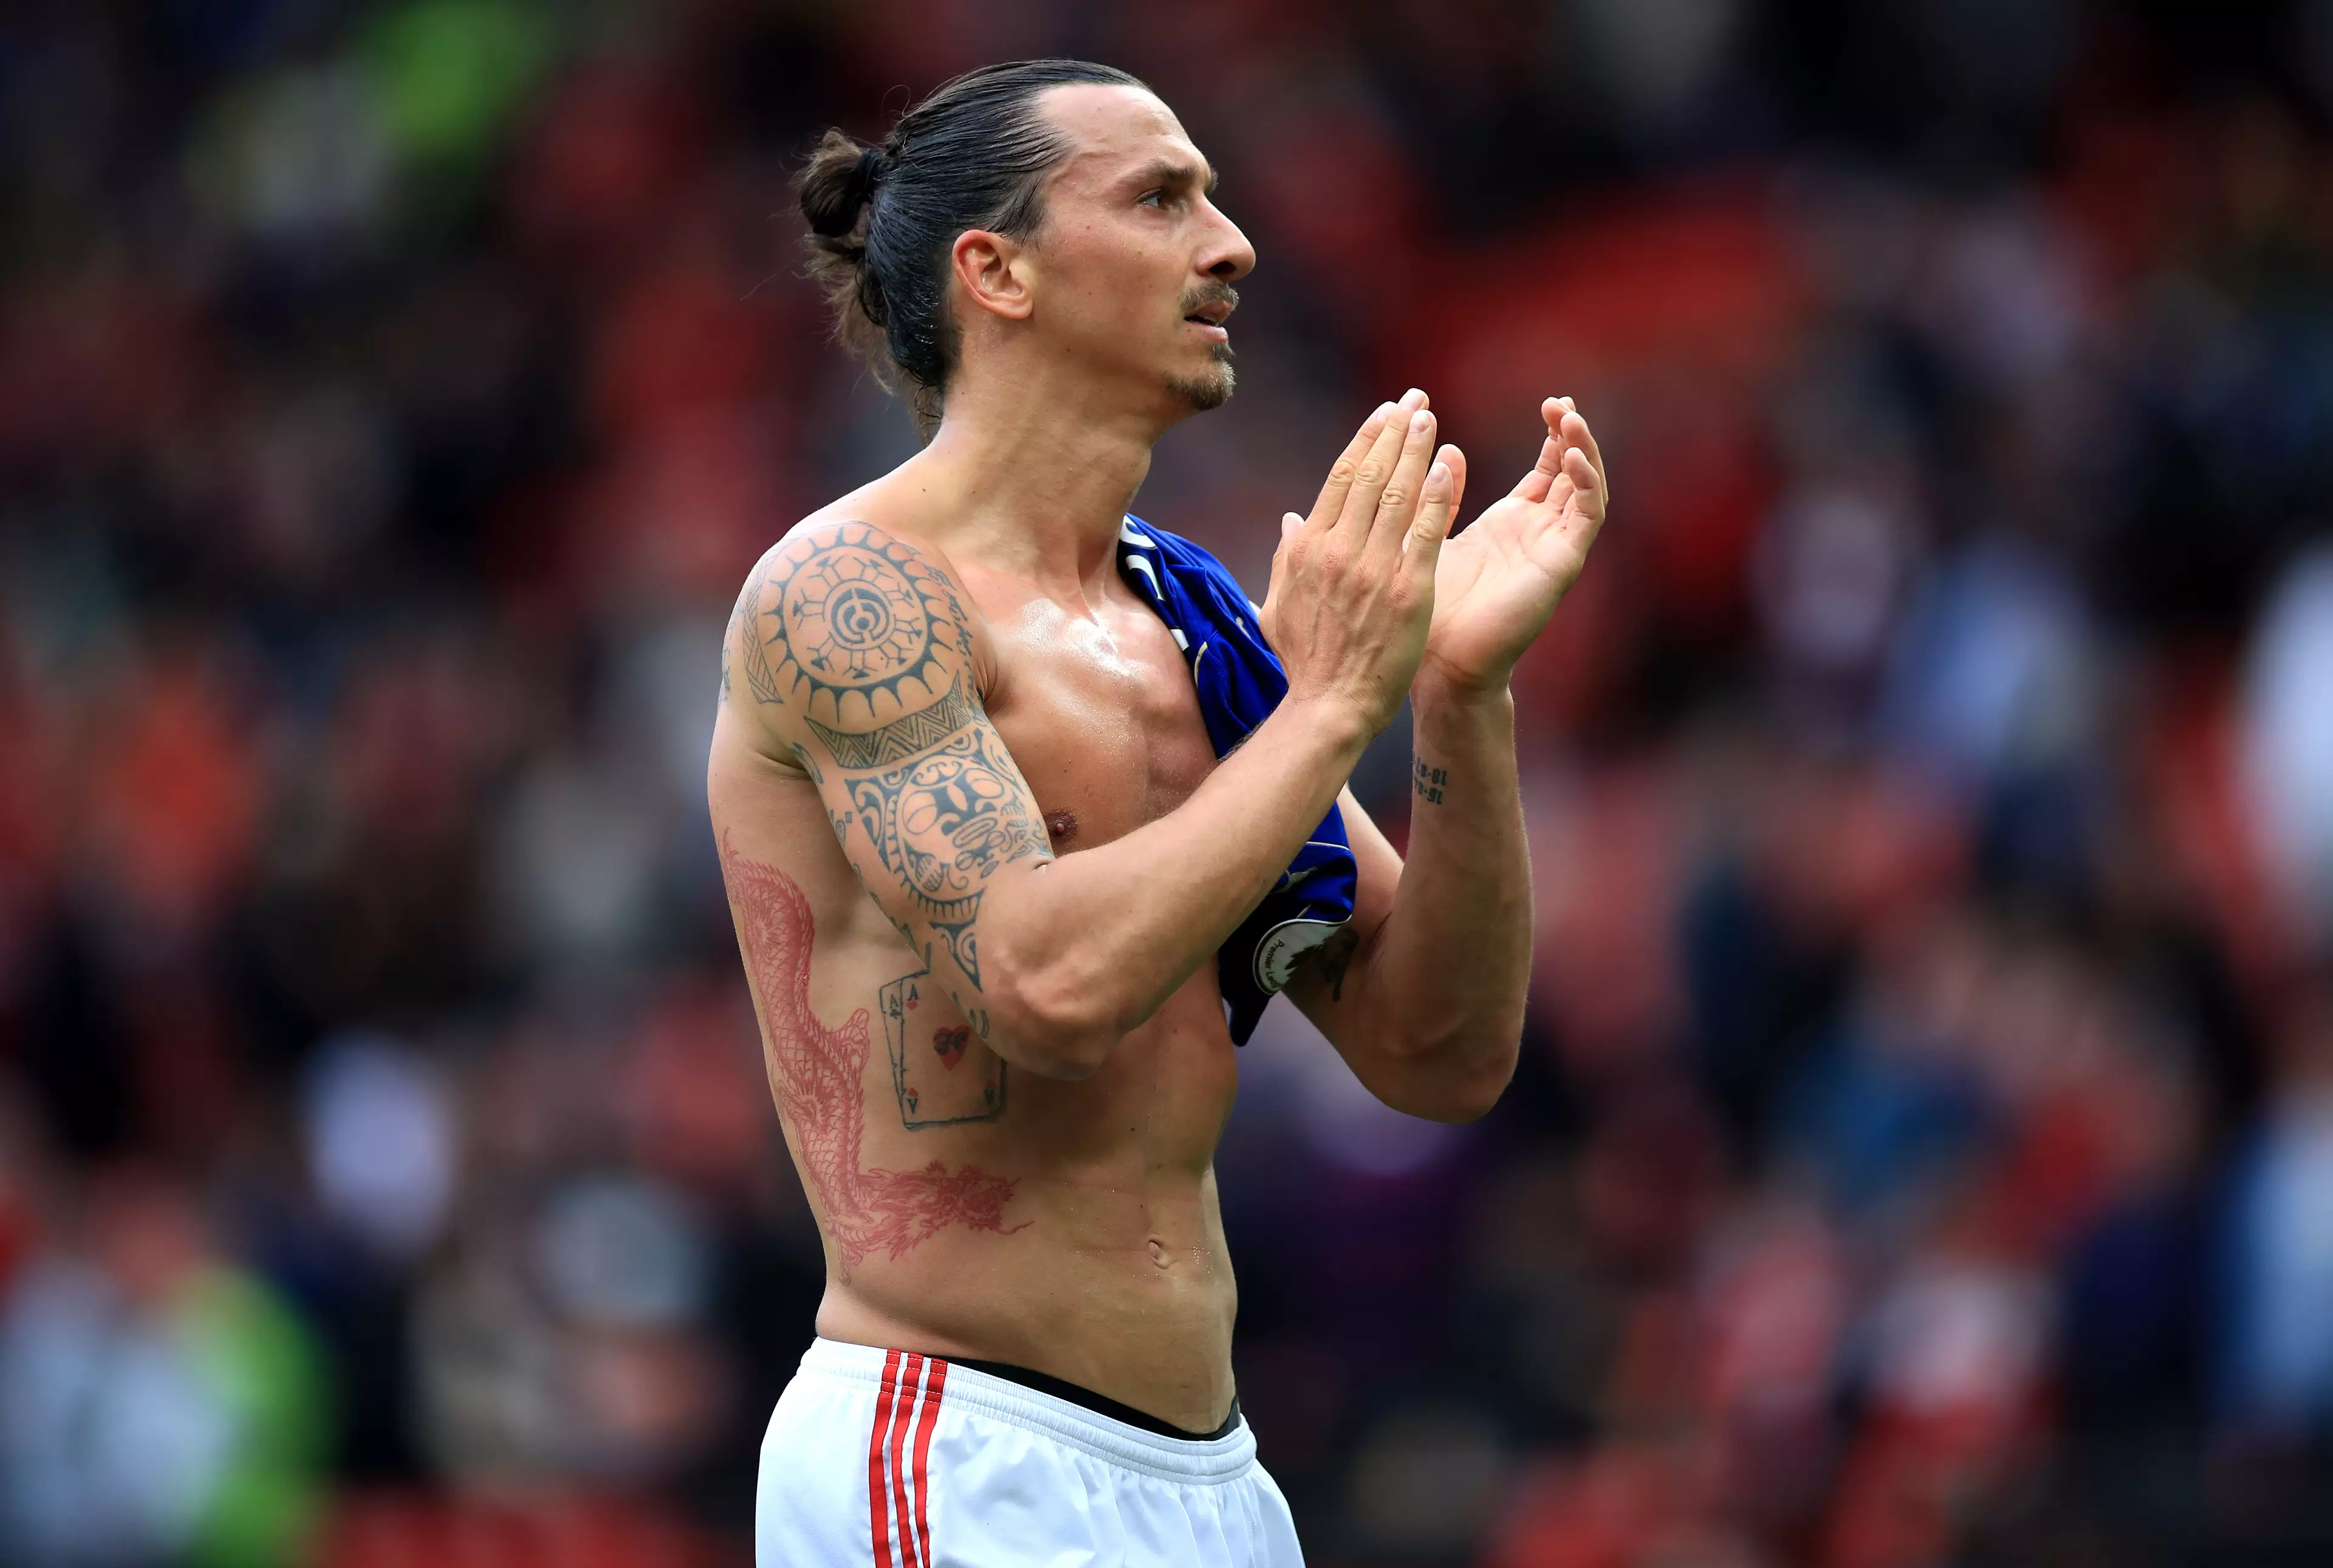 Zlatan Ibrahimovic Won't Be Playing For Manchester United In Thursday's Game